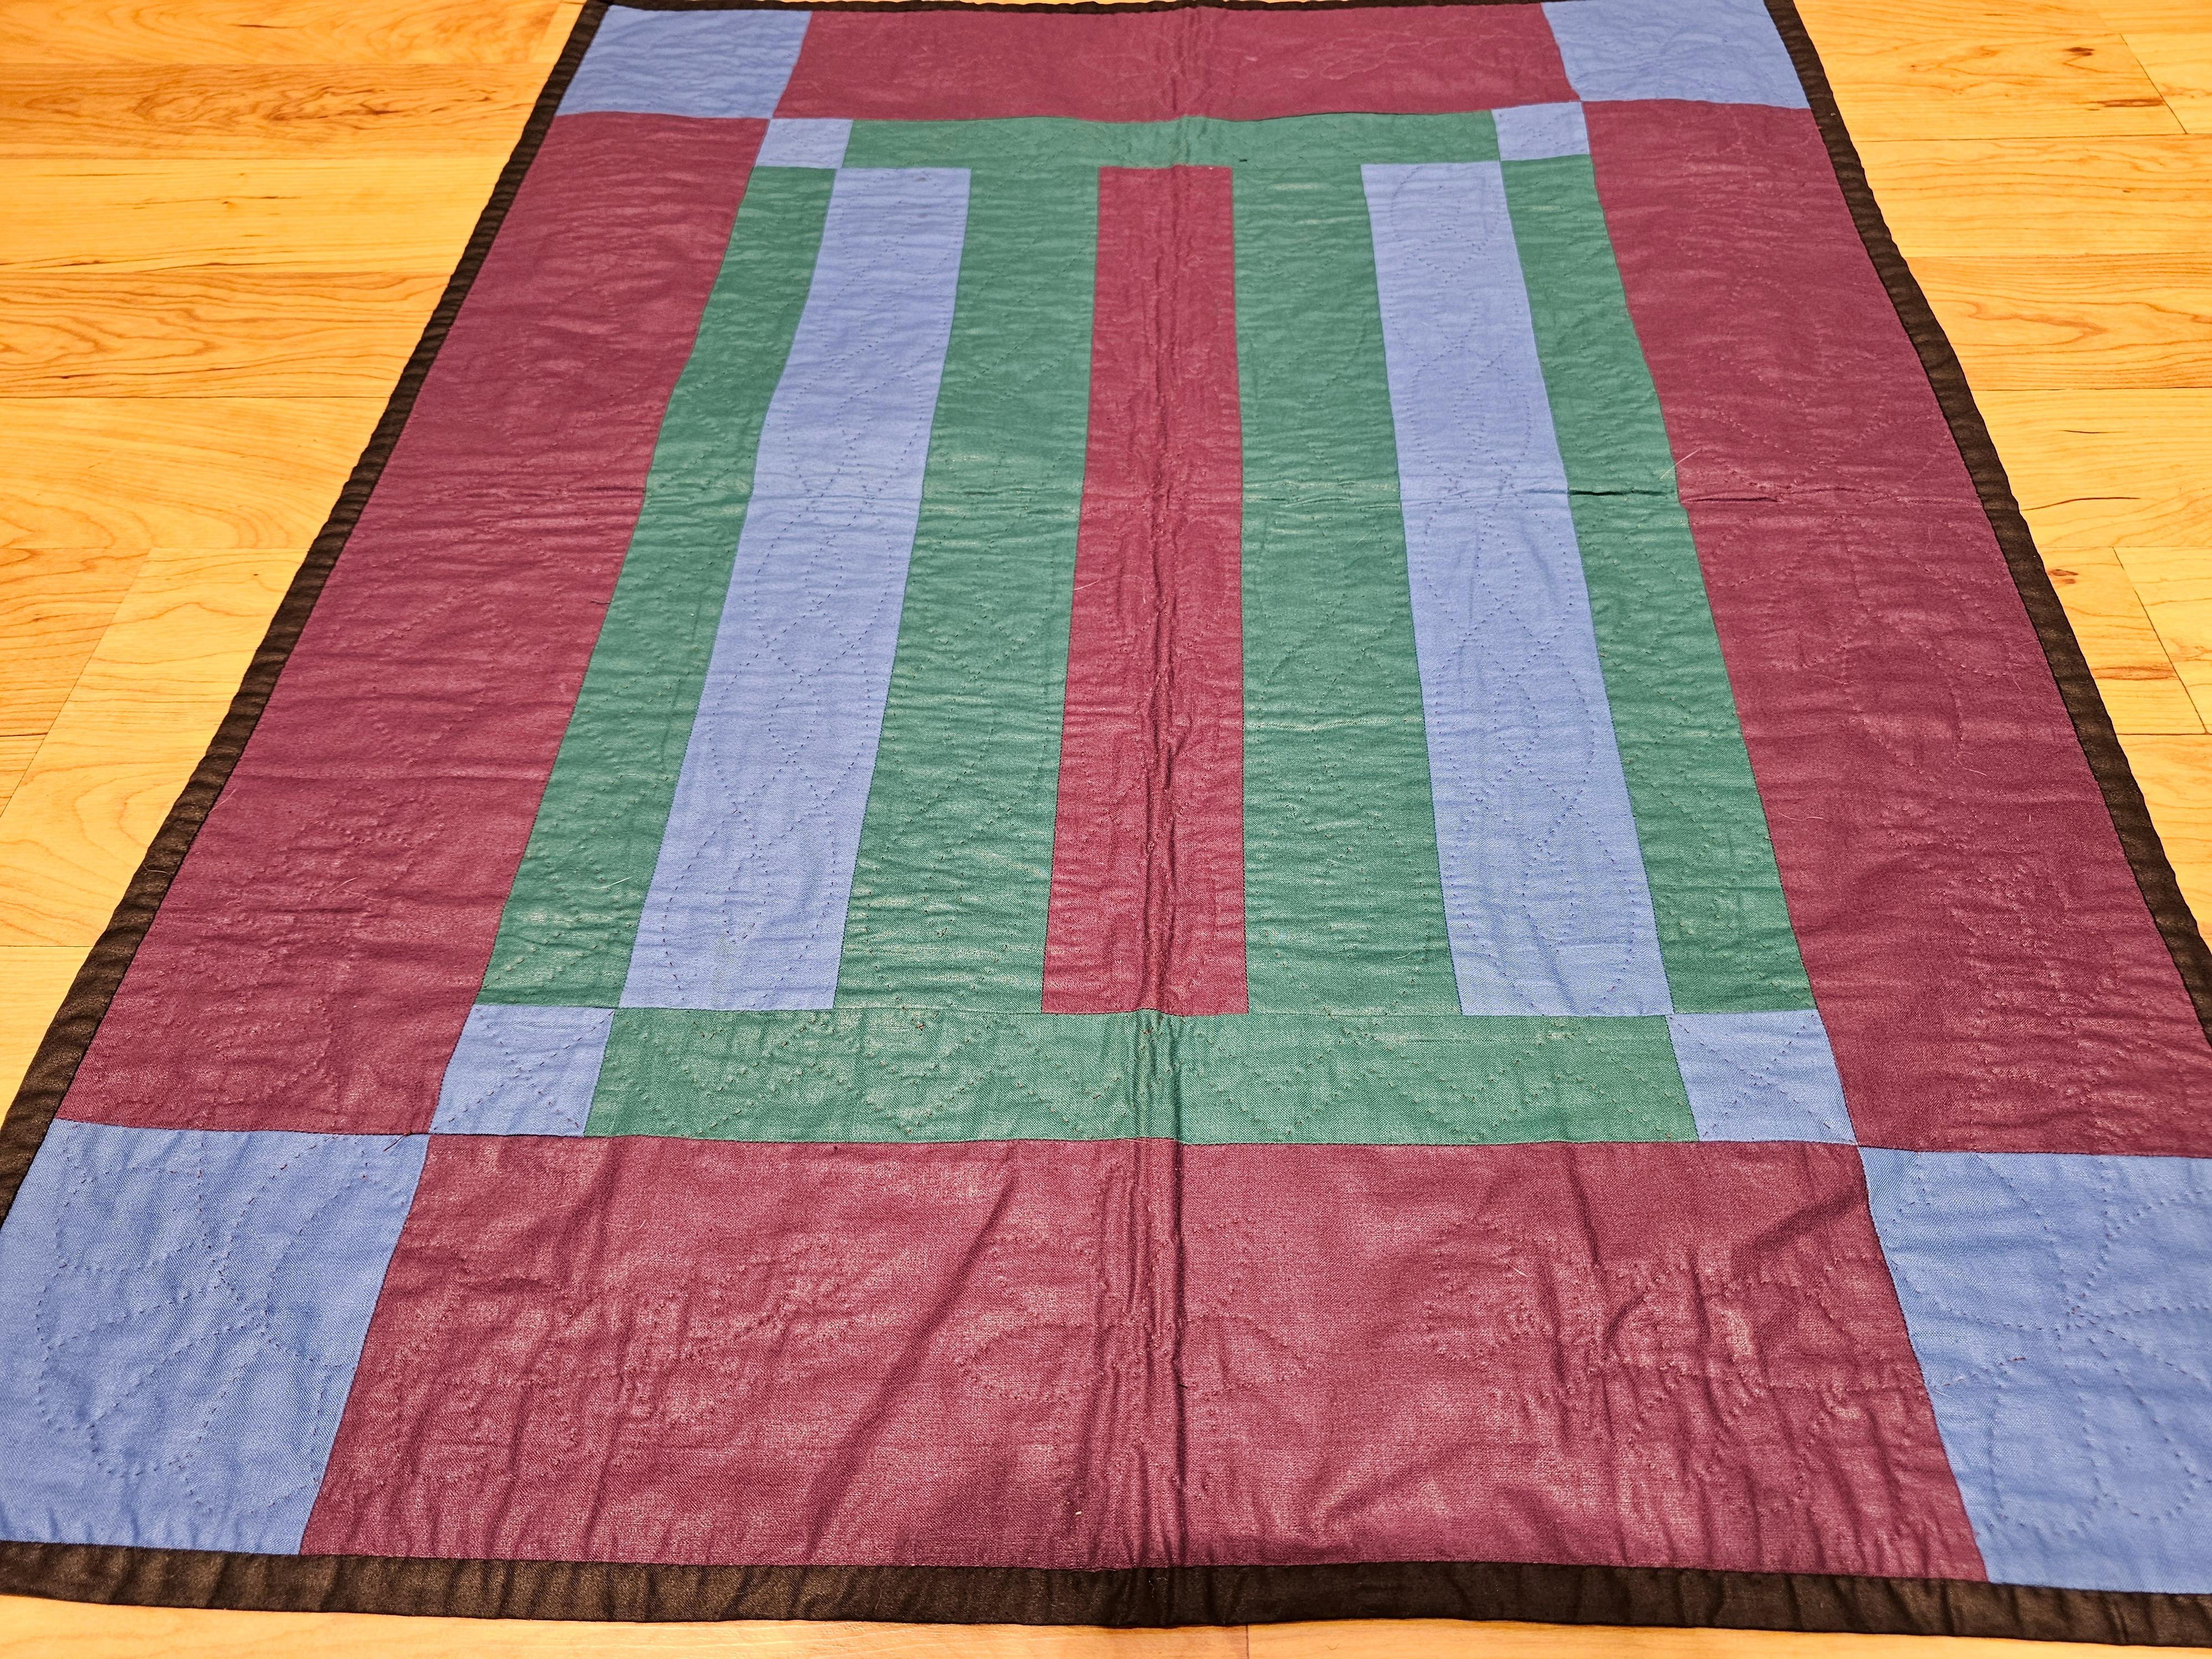 Hand-Crafted 20th Century American Amish Bars Crib Quilt in Purple, Blue, Green. Brown  For Sale